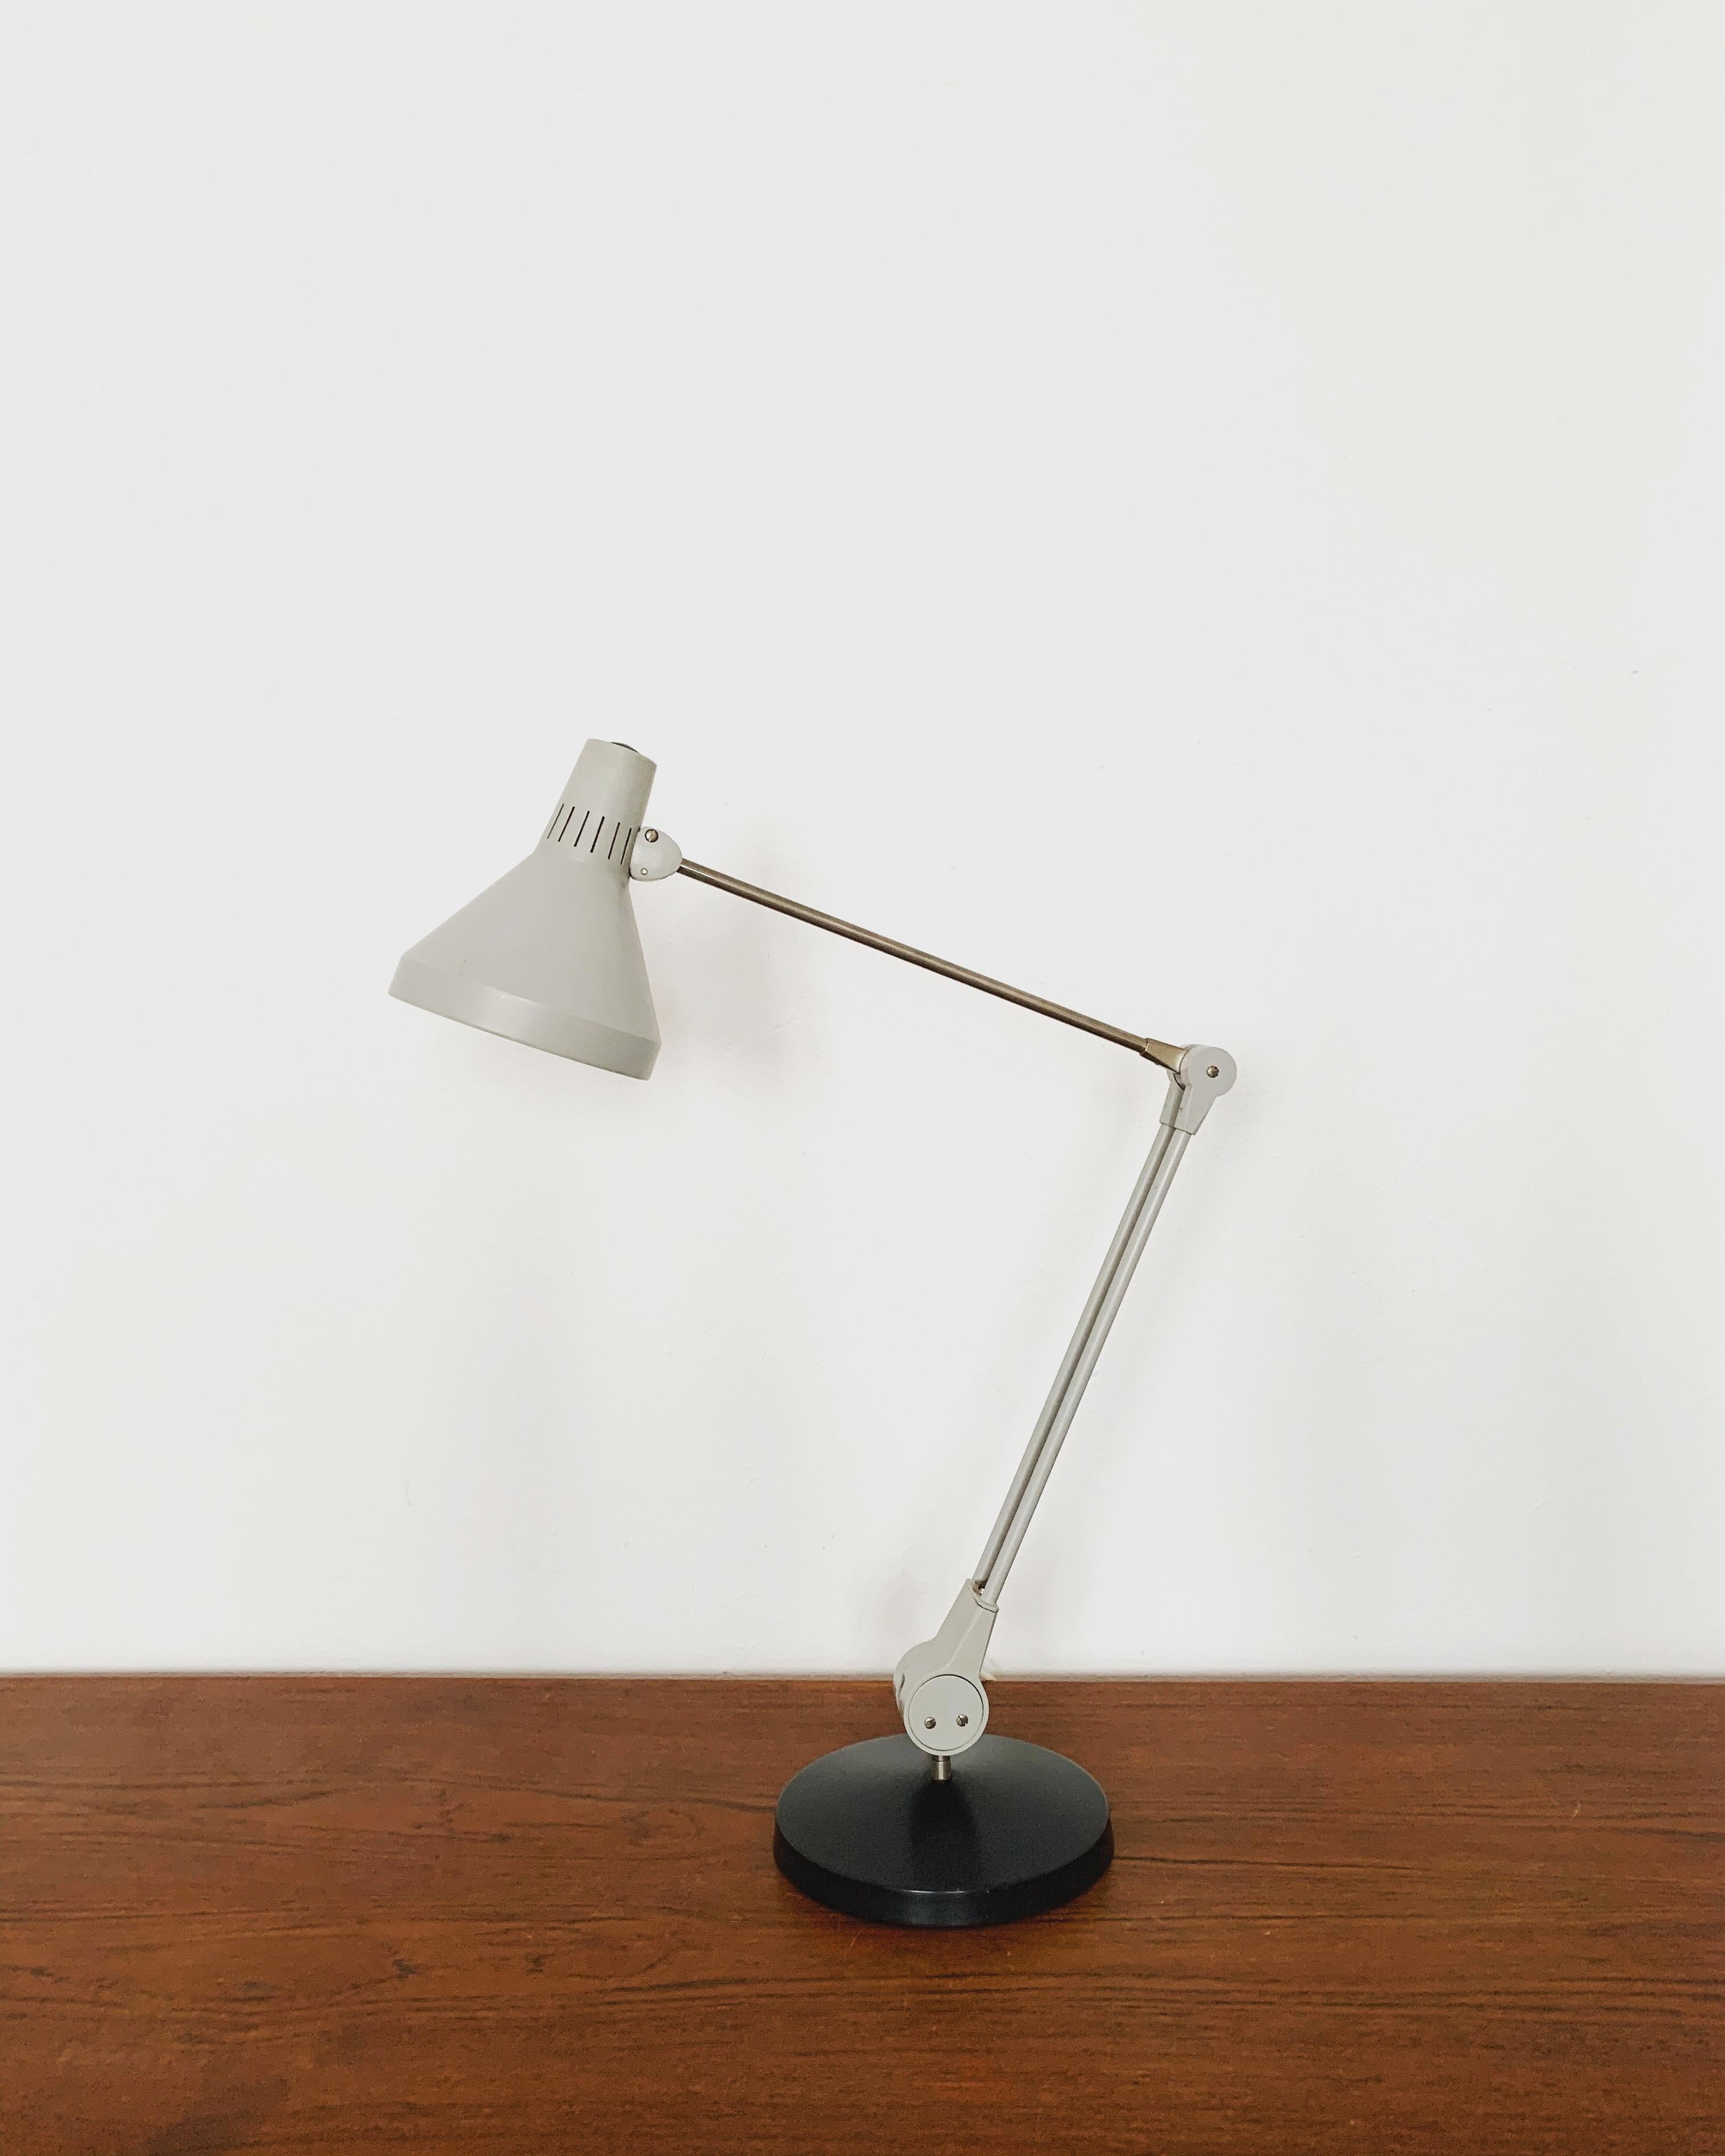 Wonderful industrial Bauhaus table lamp from the 1950s by Kaiser Leuchten.
Fantastic mid-century design.
High quality.
The lamp is flexibly adjustable.

Manufacturer: Kaiser Idell/ Kaiser Leuchten

Condition:

Very good vintage condition